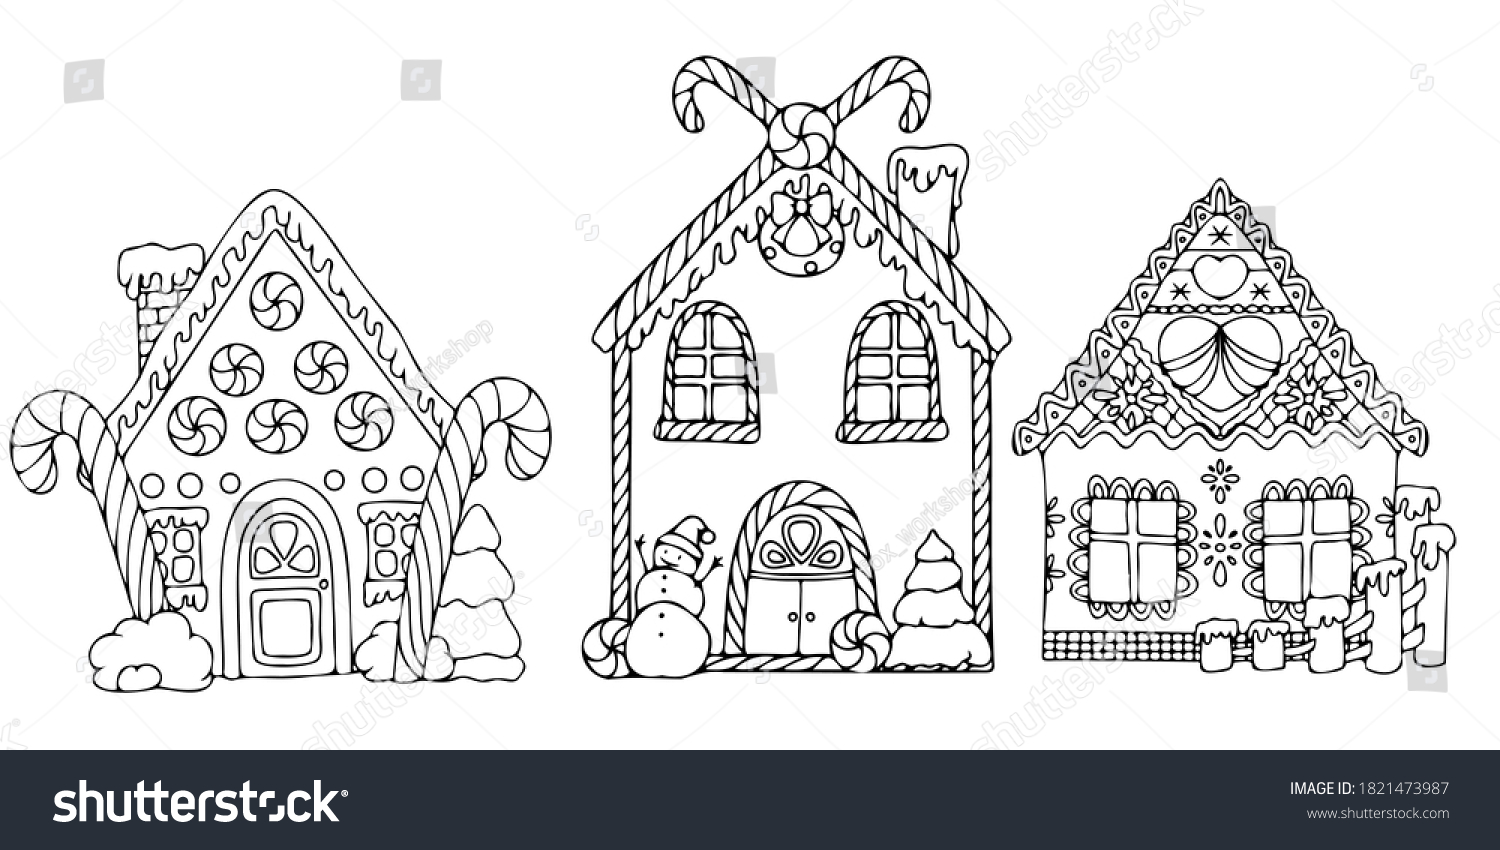 1,610 Gingerbread House Sketch Images, Stock Photos & Vectors ...